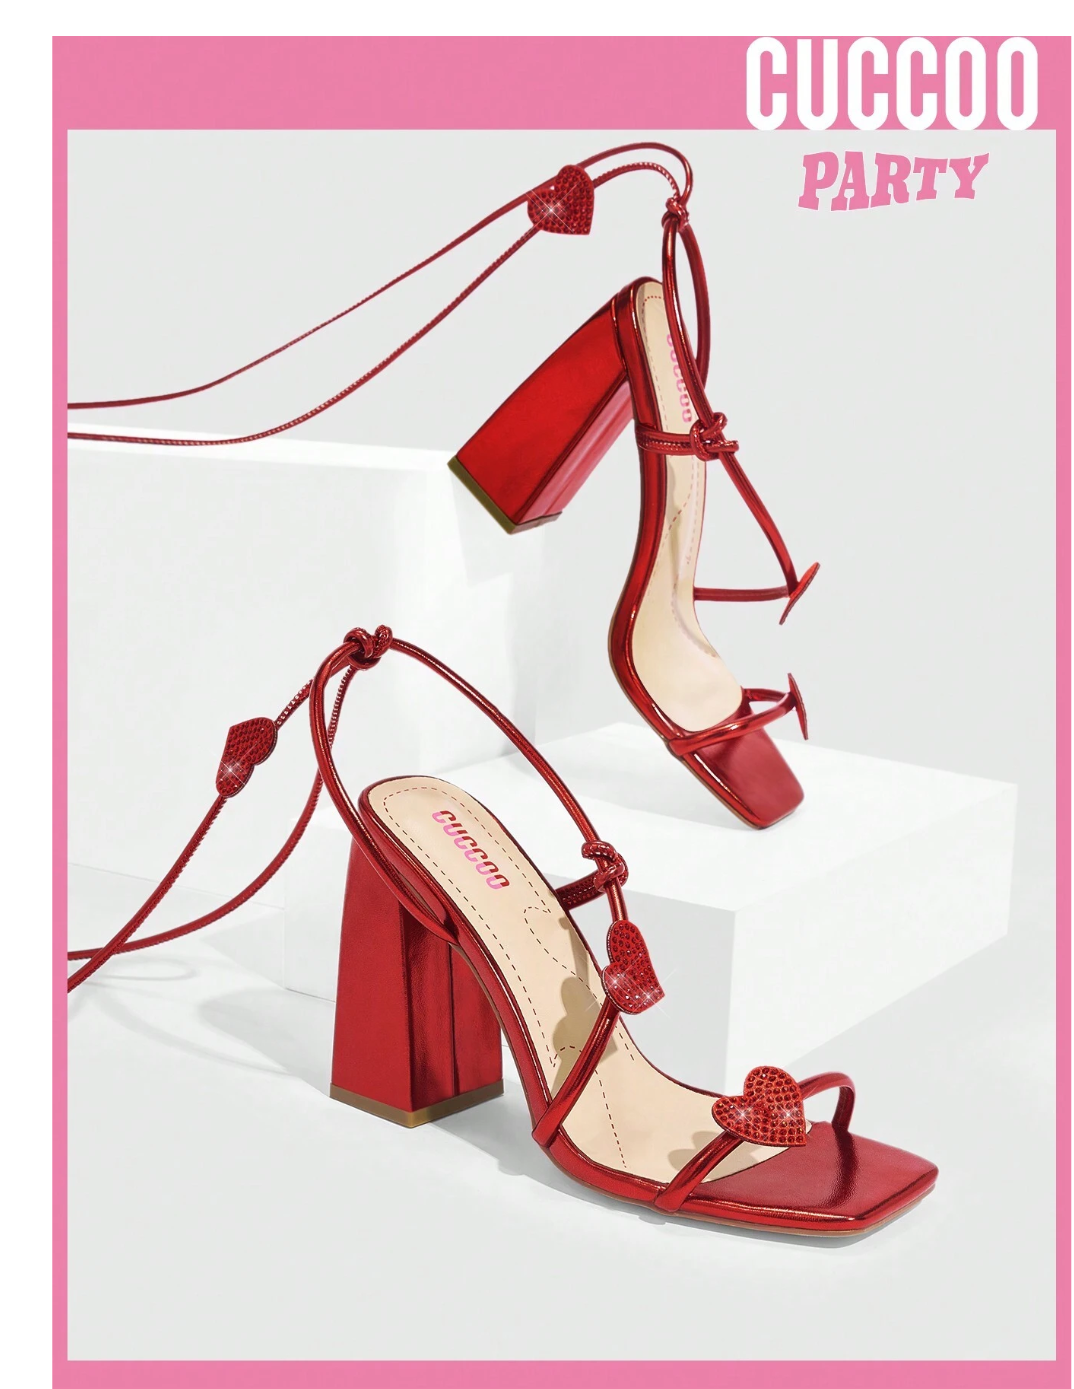 Heartbeat Chic: Cuccoo Party Collection - Valentine's Day High Heeled Heart Shaped Sandals for Women.